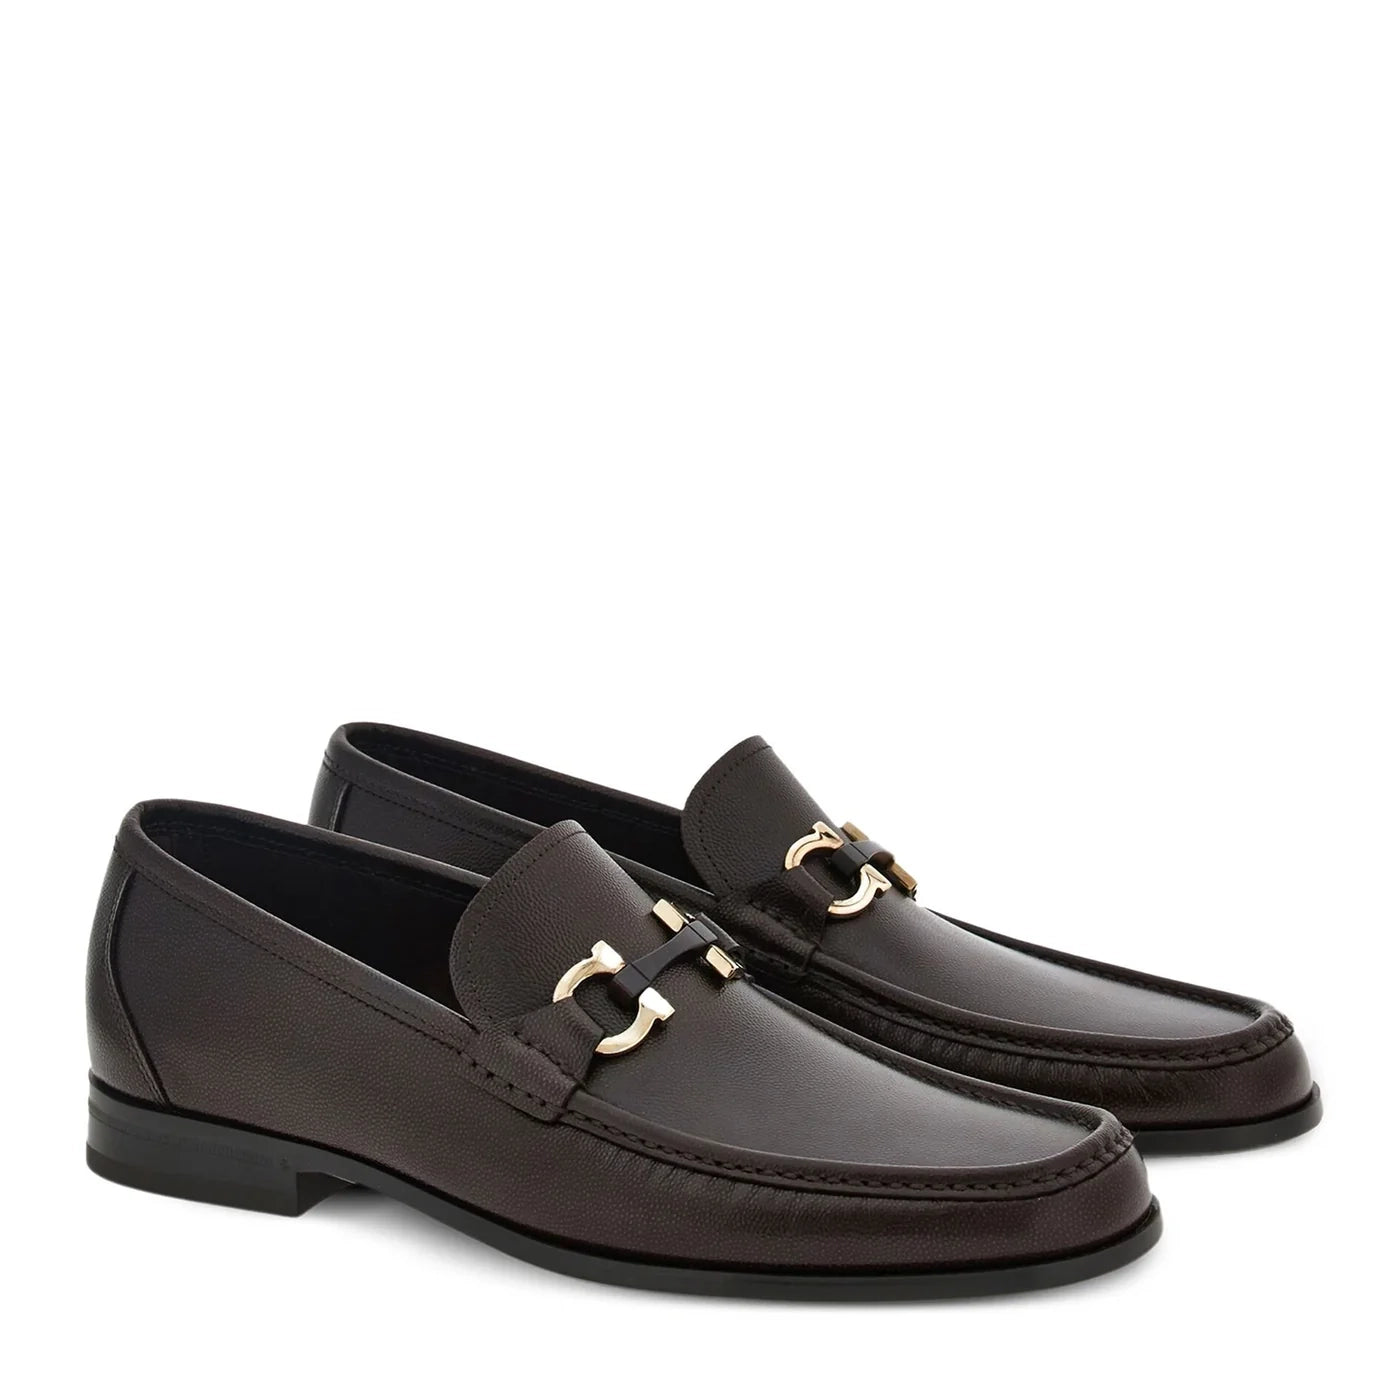 Dark Brown Leather Loafers